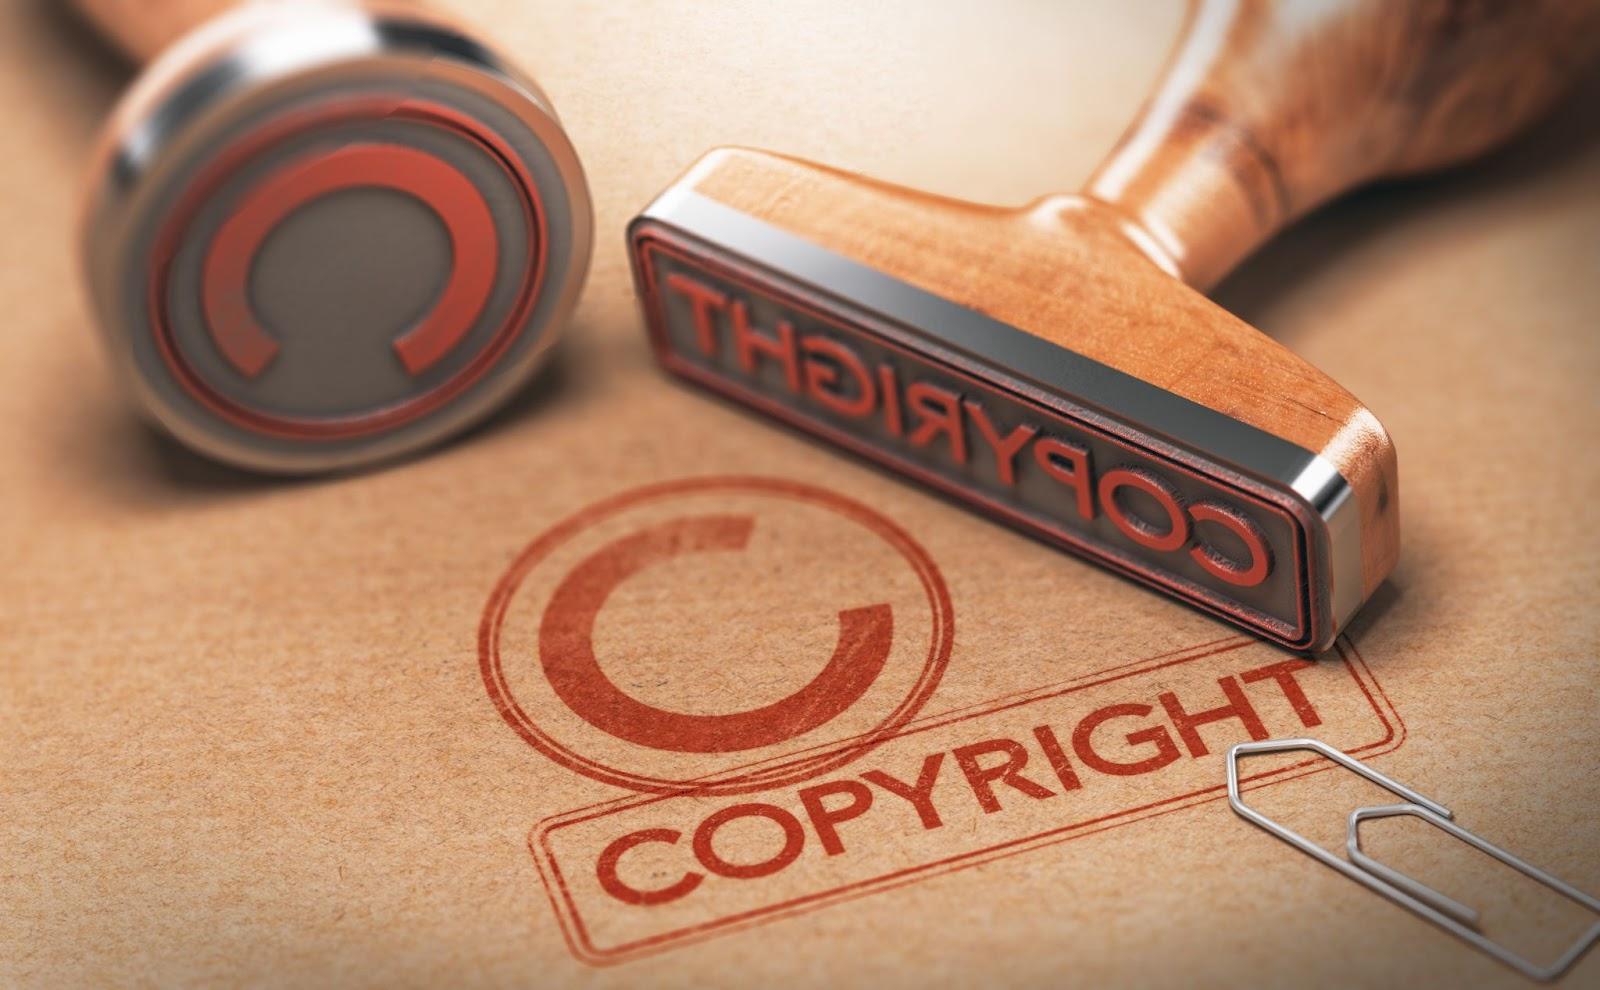 Copyright stamp in red on brown paper